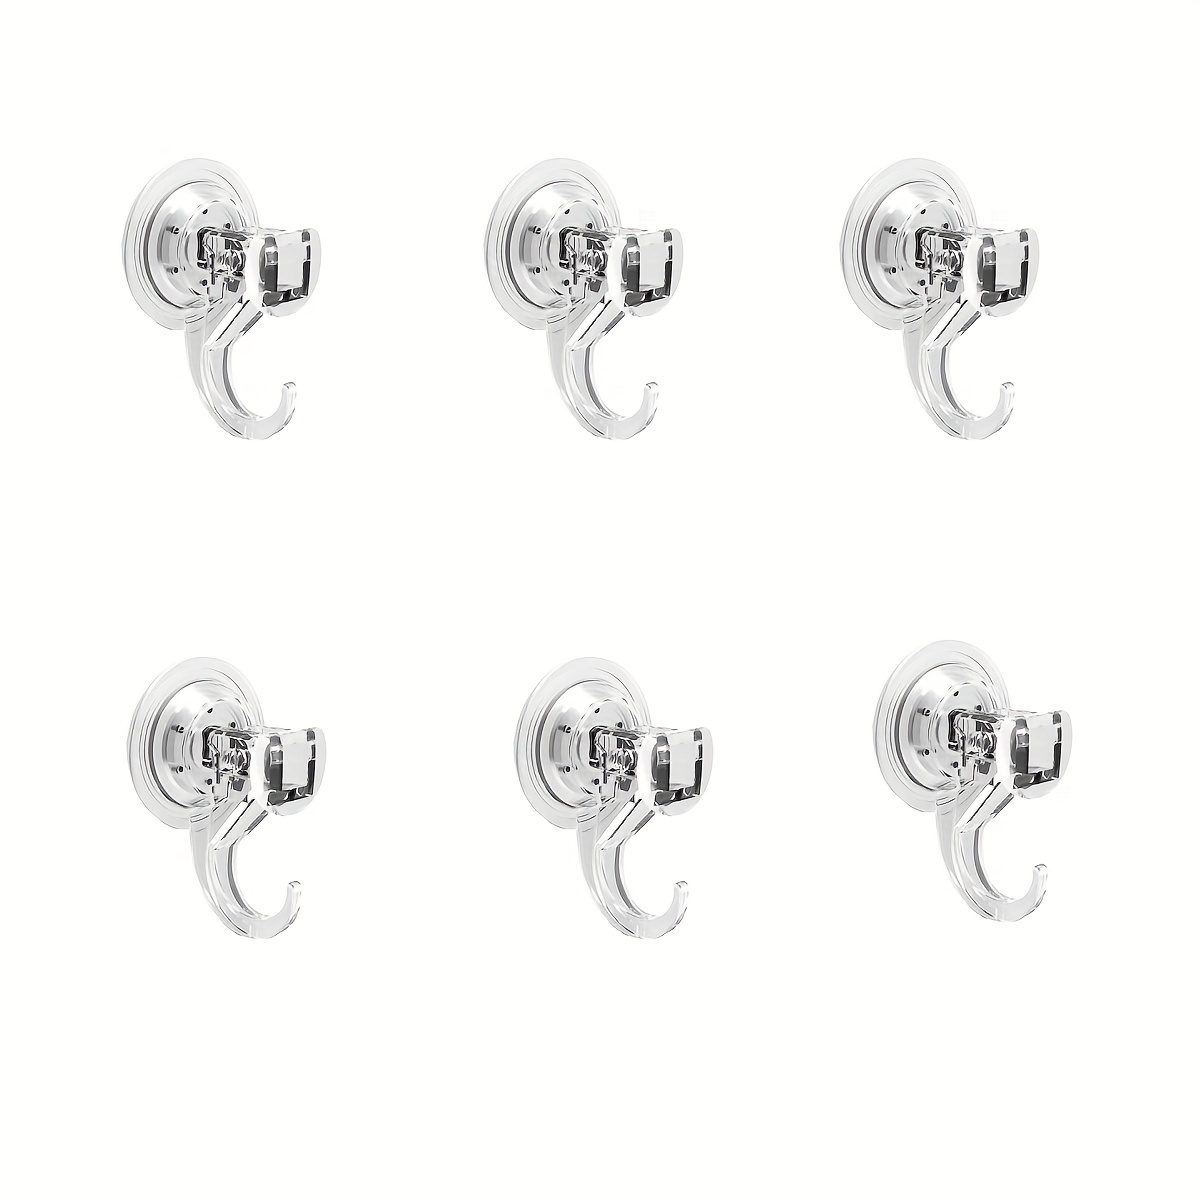 Suction Cup Hooks, Shower Suction Cup Hooks, Clear Window Suction Cups With  Hooks, Heavy Duty Waterproof Vacuum Suction Cup Garland Hooks For Window,  Suit For Bathroom, Shower Wall, Tile, Glass, Door, Bathroom